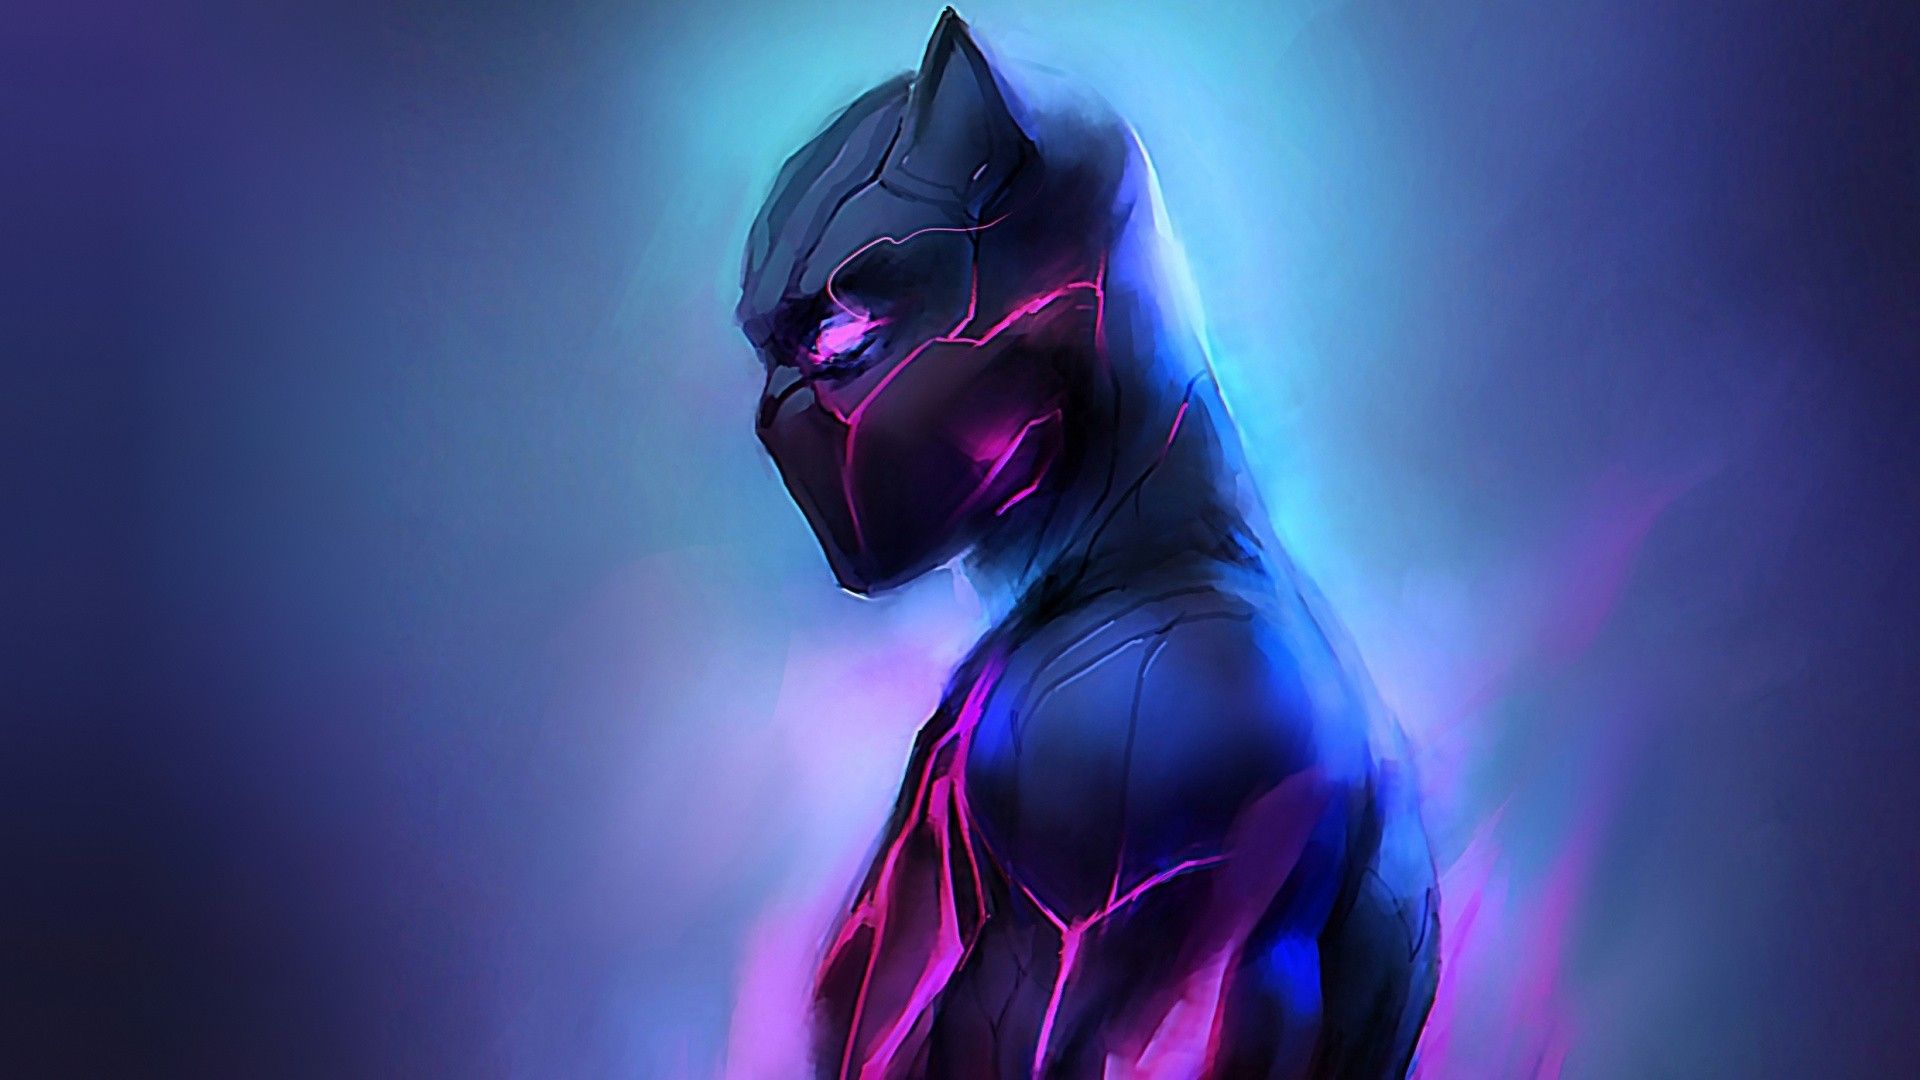 Black Panther Wallpapers  Top 65 Best Black Panther Backgrounds Download